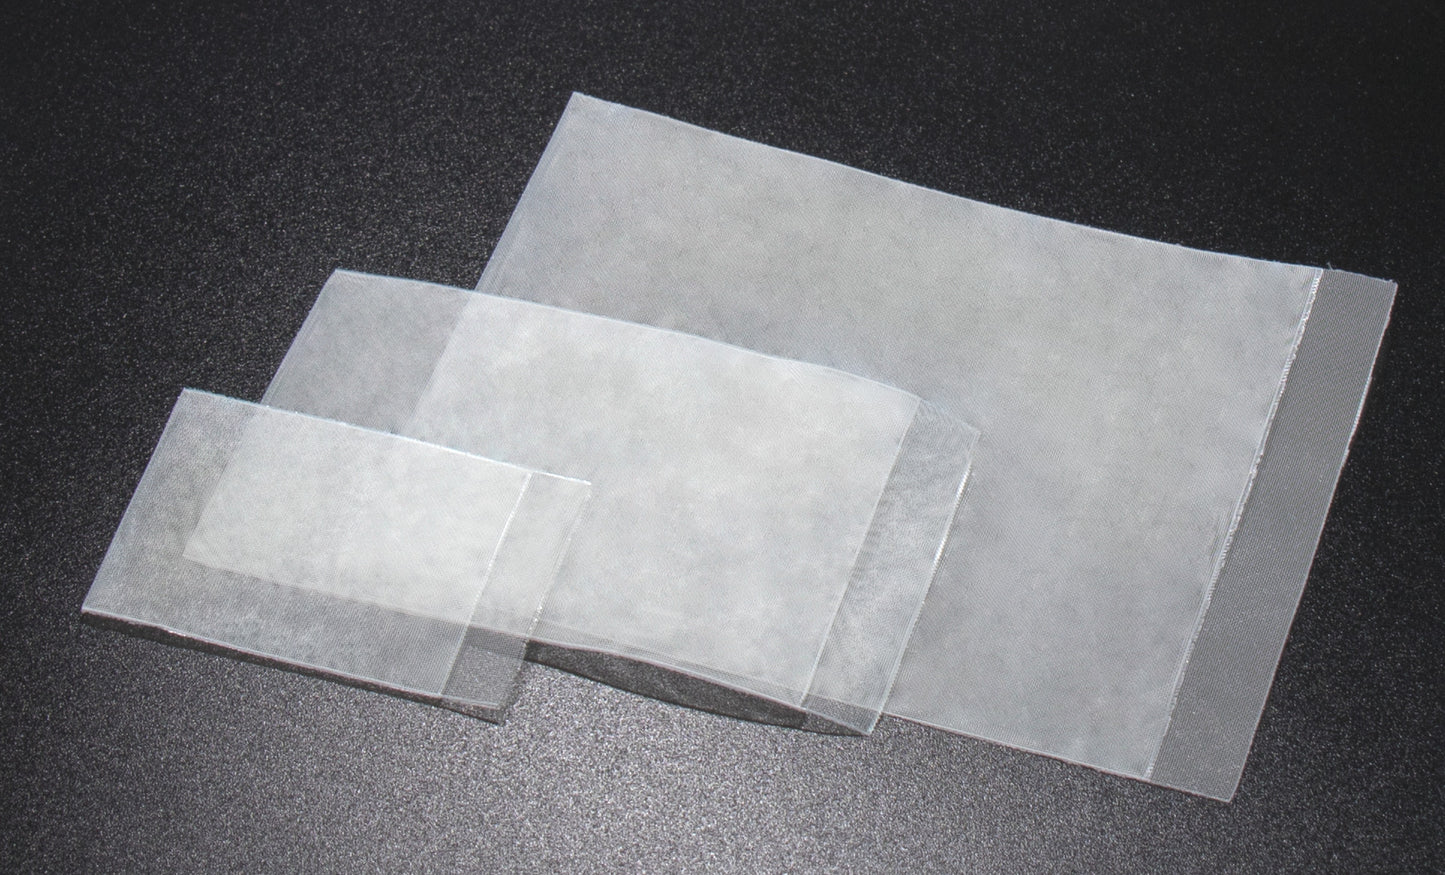 Biopsy Bags, Made of Solvent Resistant Polyester W/ Thin Mesh of 0.2×0.2 mm, Designed W/ Peel-Open - Dim. 45×75 mm & 30×45 mm - x100 pieces